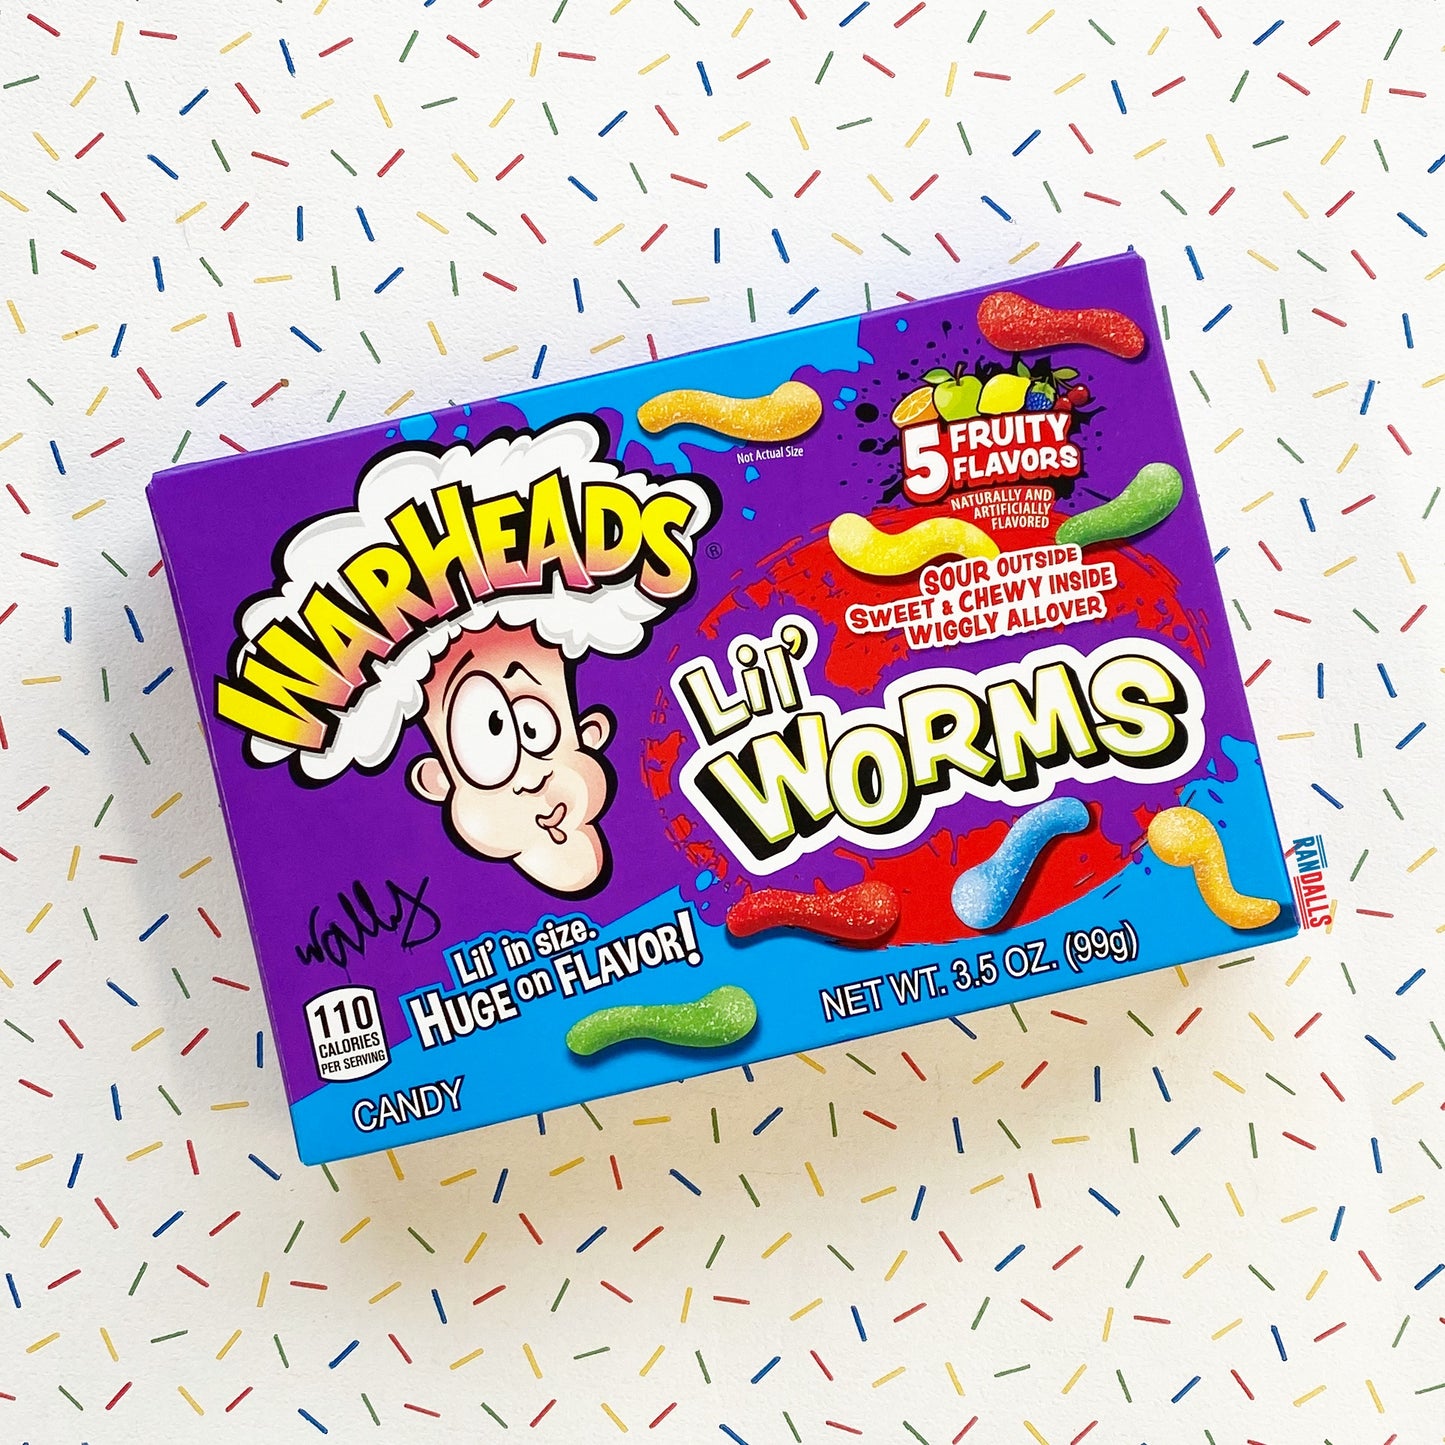 warheads super sour, warheads lil worms, sour outside sweet and chewy inside wiggly allover, lil in size huge on flavour, sour worms, worm candy, american candy, american sour candy, randalls,